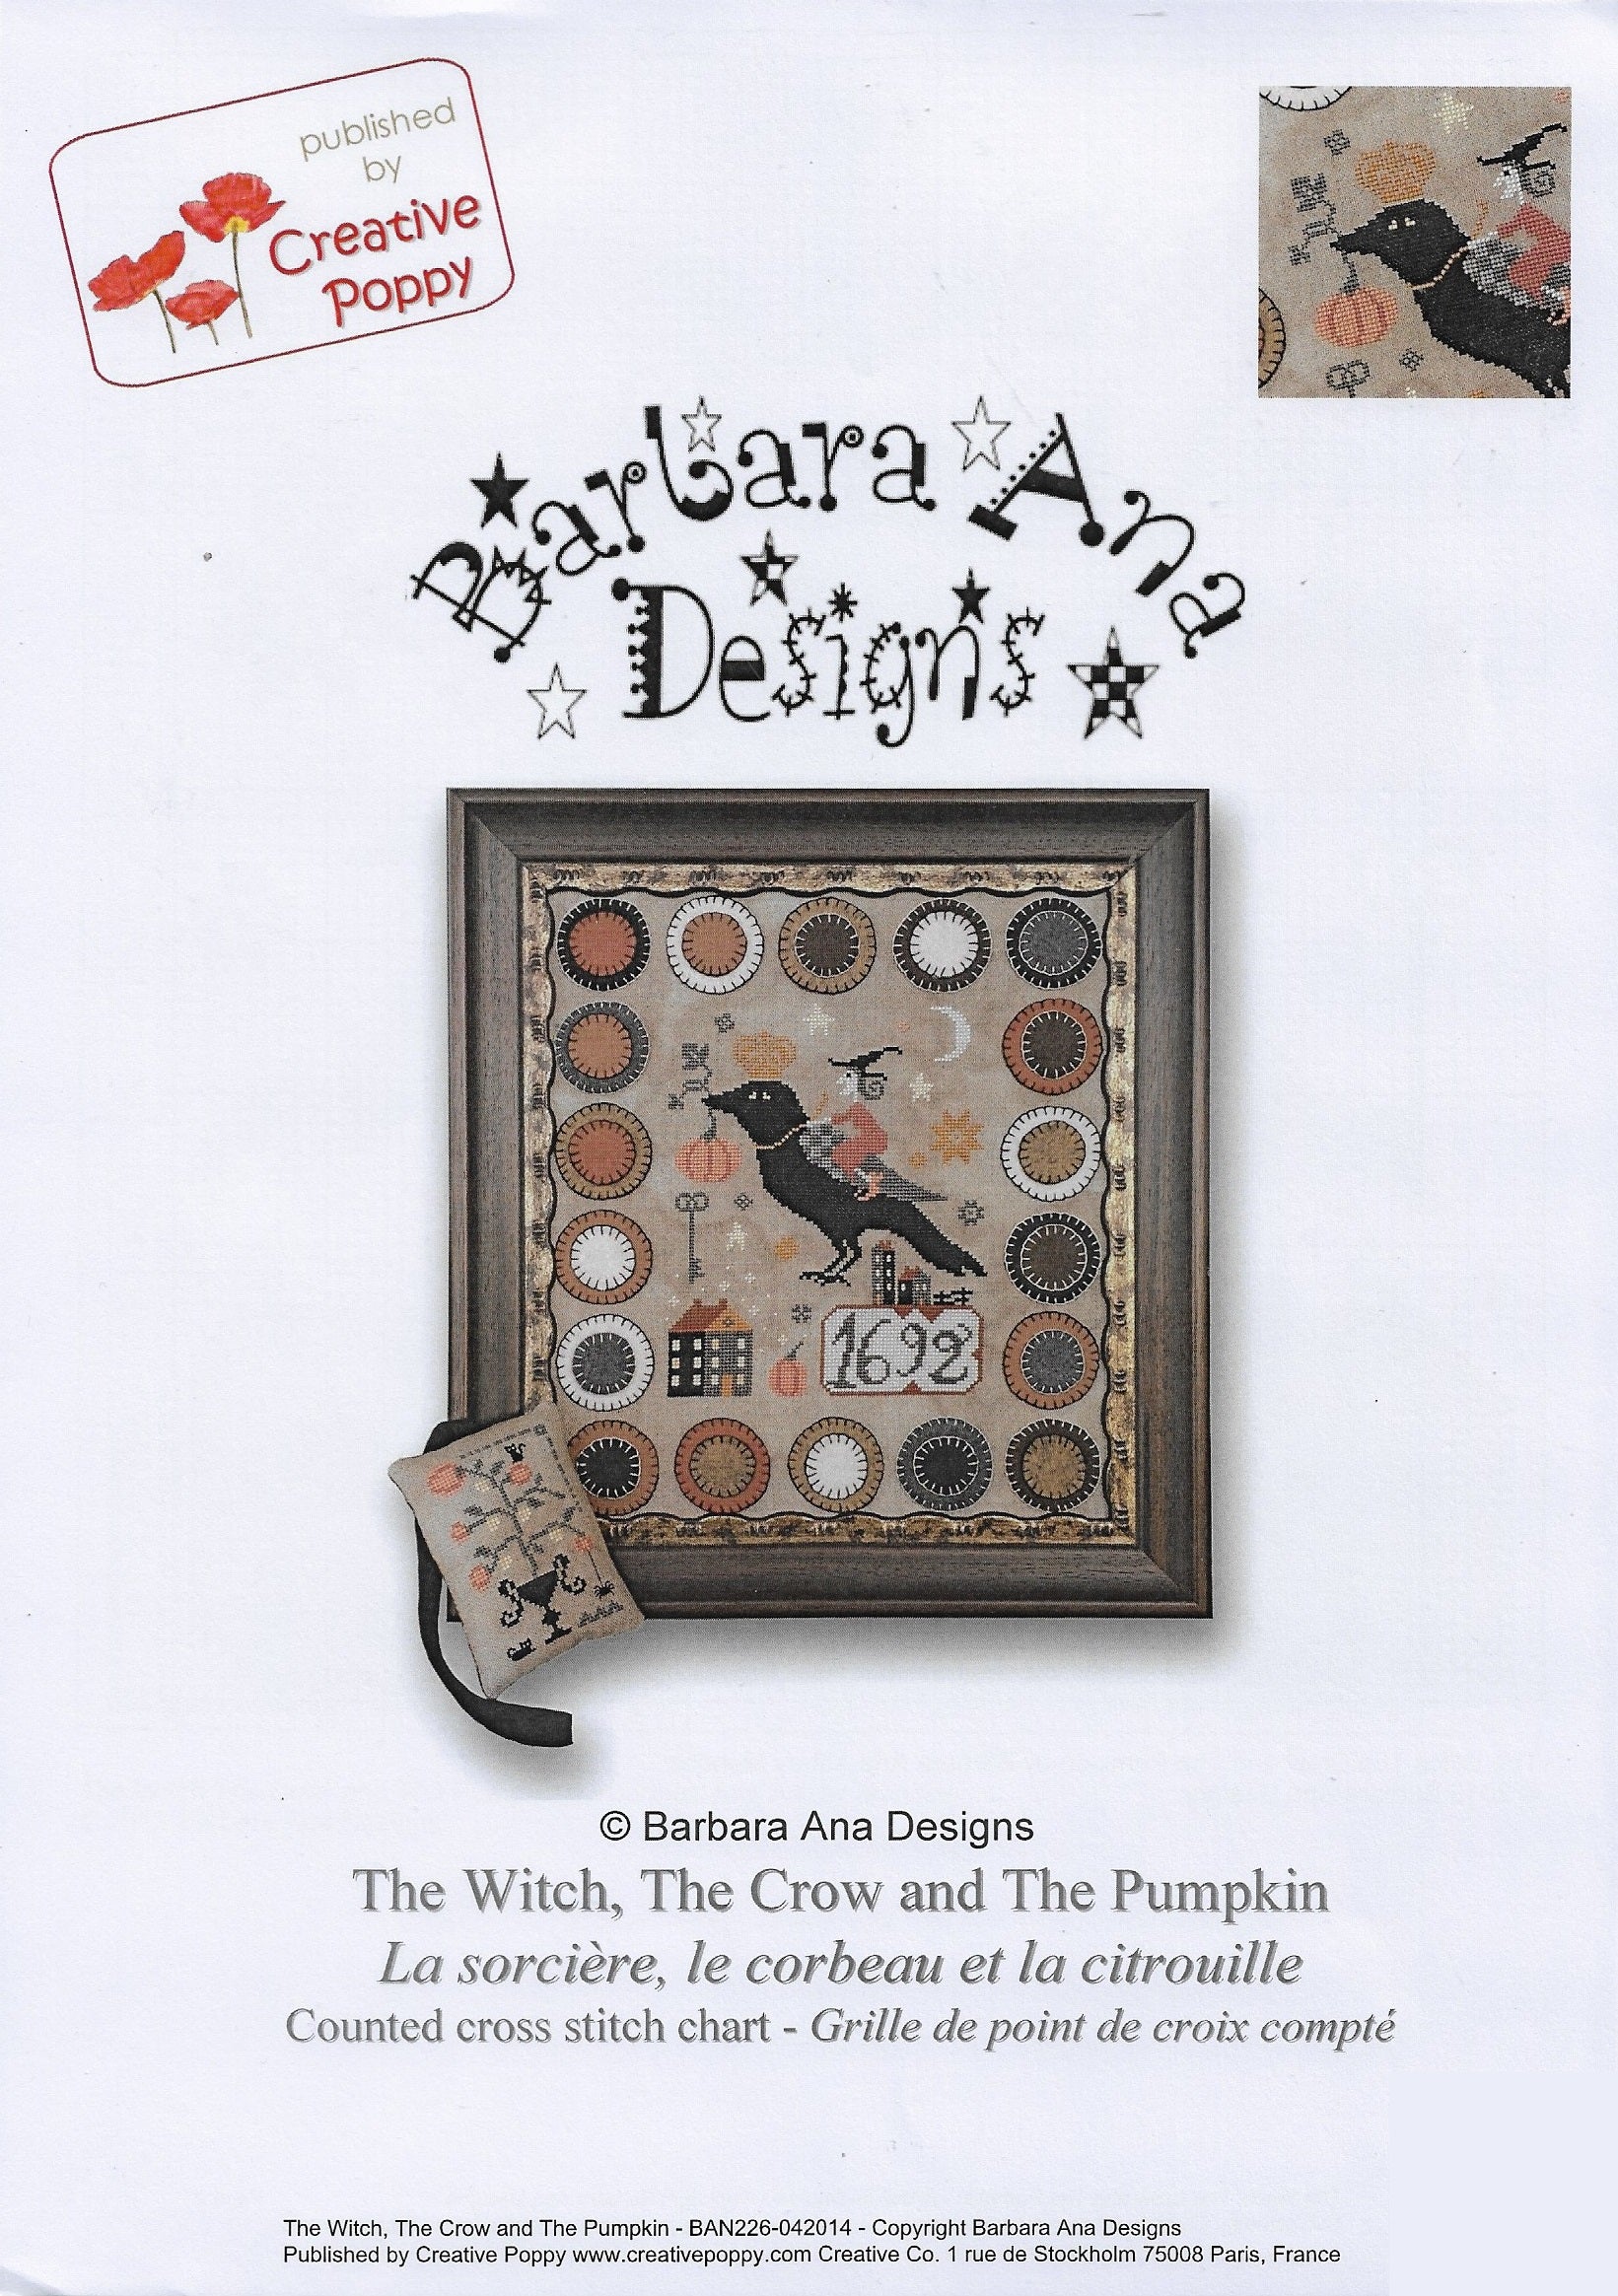 Creative Poppy Barbara Ana Designs The Witch, The Crow and The Pumpkin primative halloween cross stitch pattern